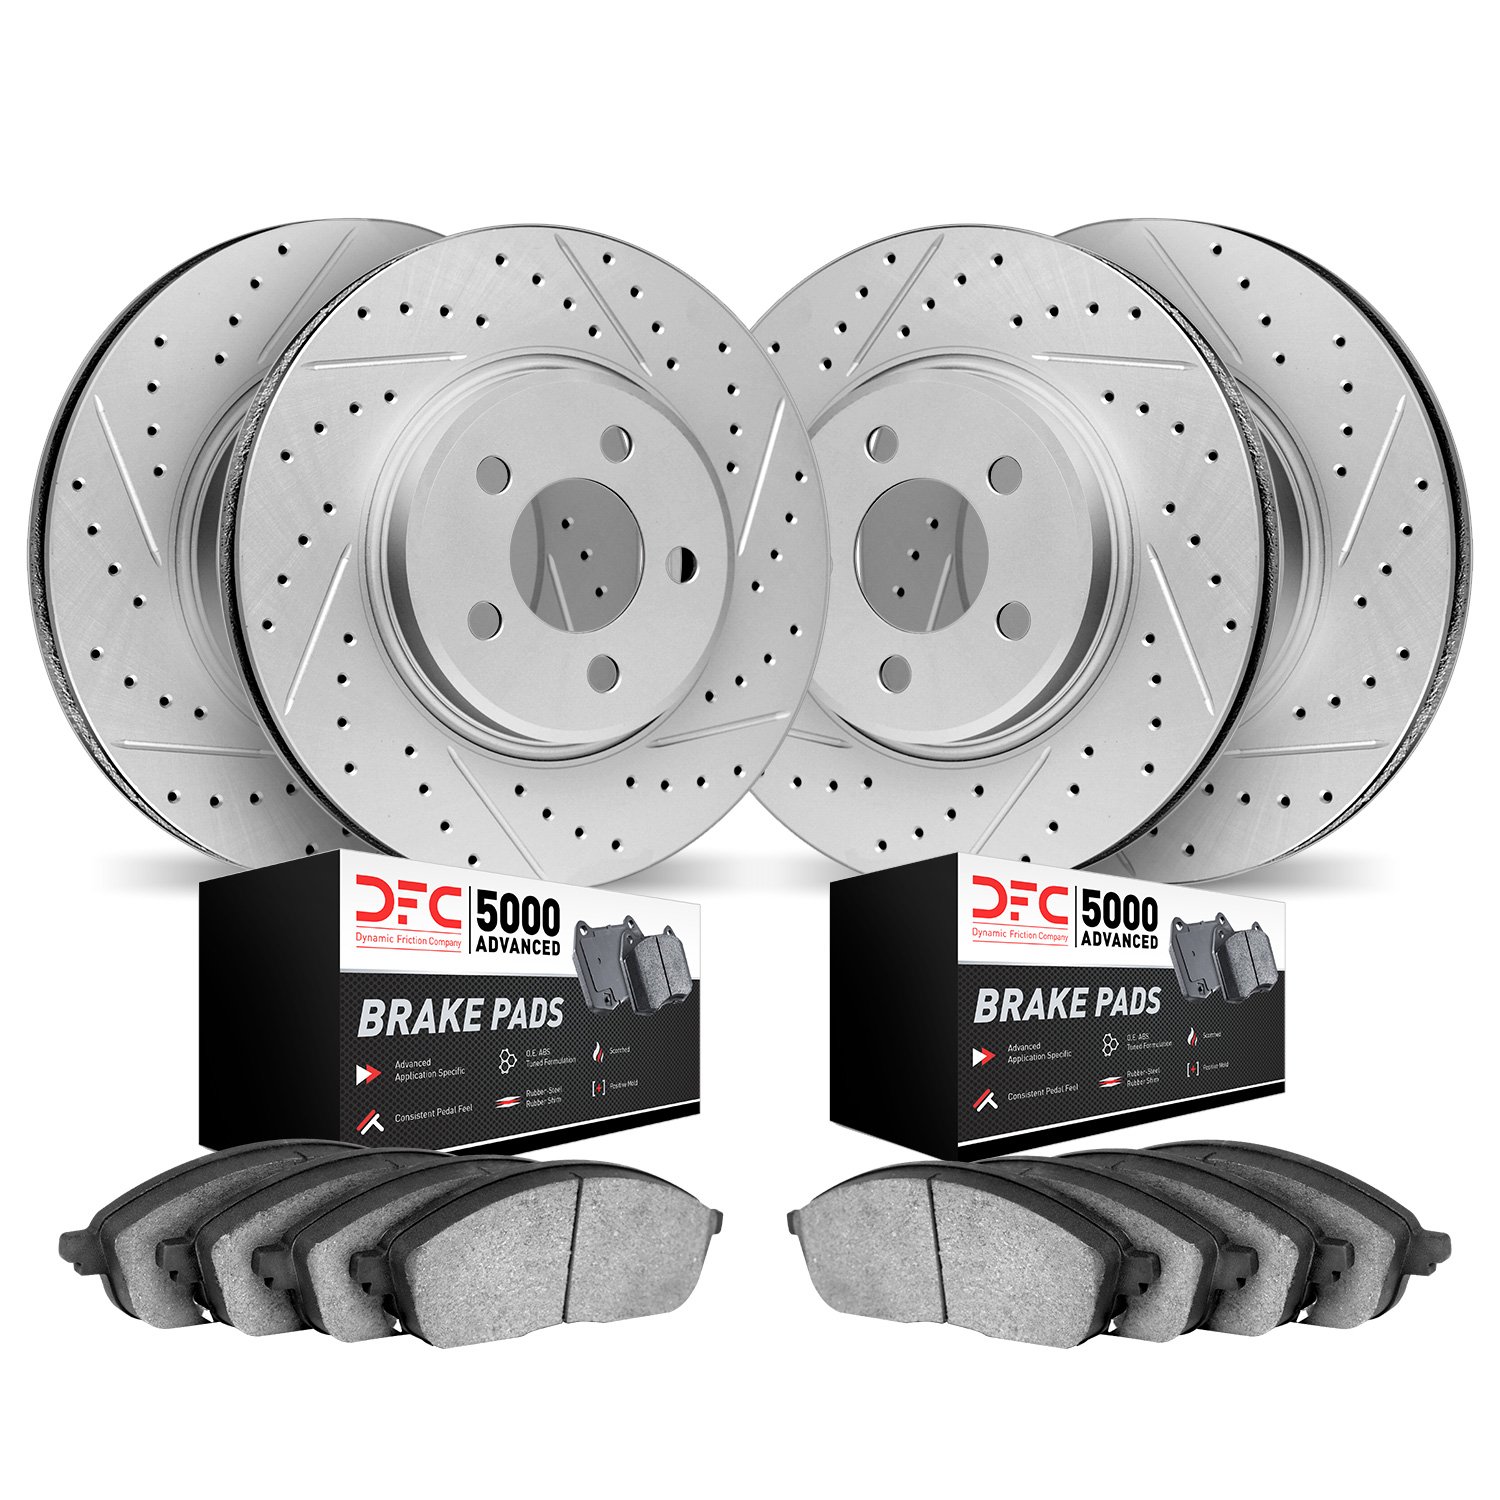 2504-13015 Geoperformance Drilled/Slotted Rotors w/5000 Advanced Brake Pads Kit, 2015-2021 Subaru, Position: Front and Rear